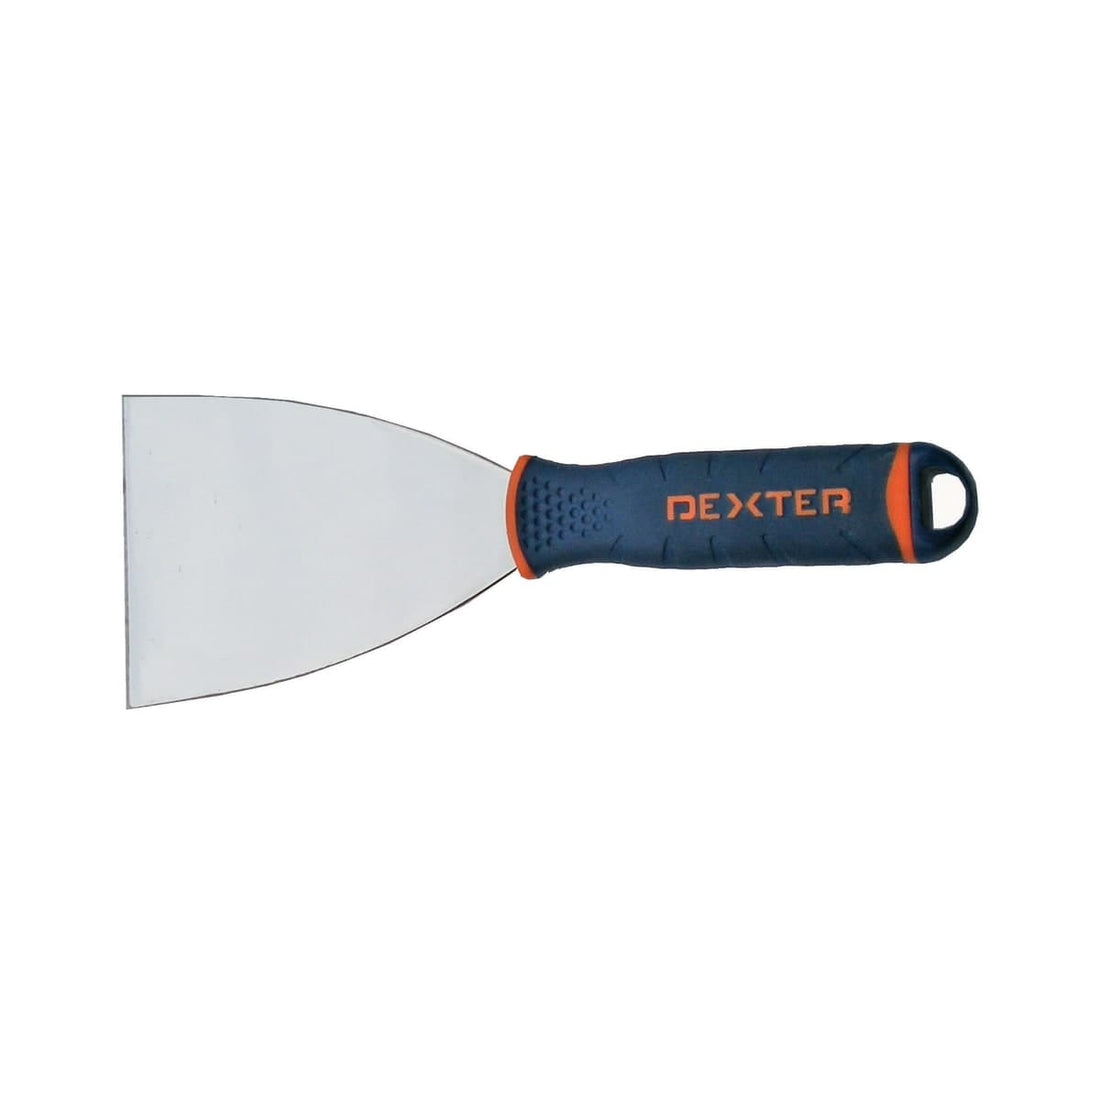 DEXTER STAINLESS STEEL SPATULA WITH TWO-COMPONENT HANDLE 100 CM - best price from Maltashopper.com BR400900094